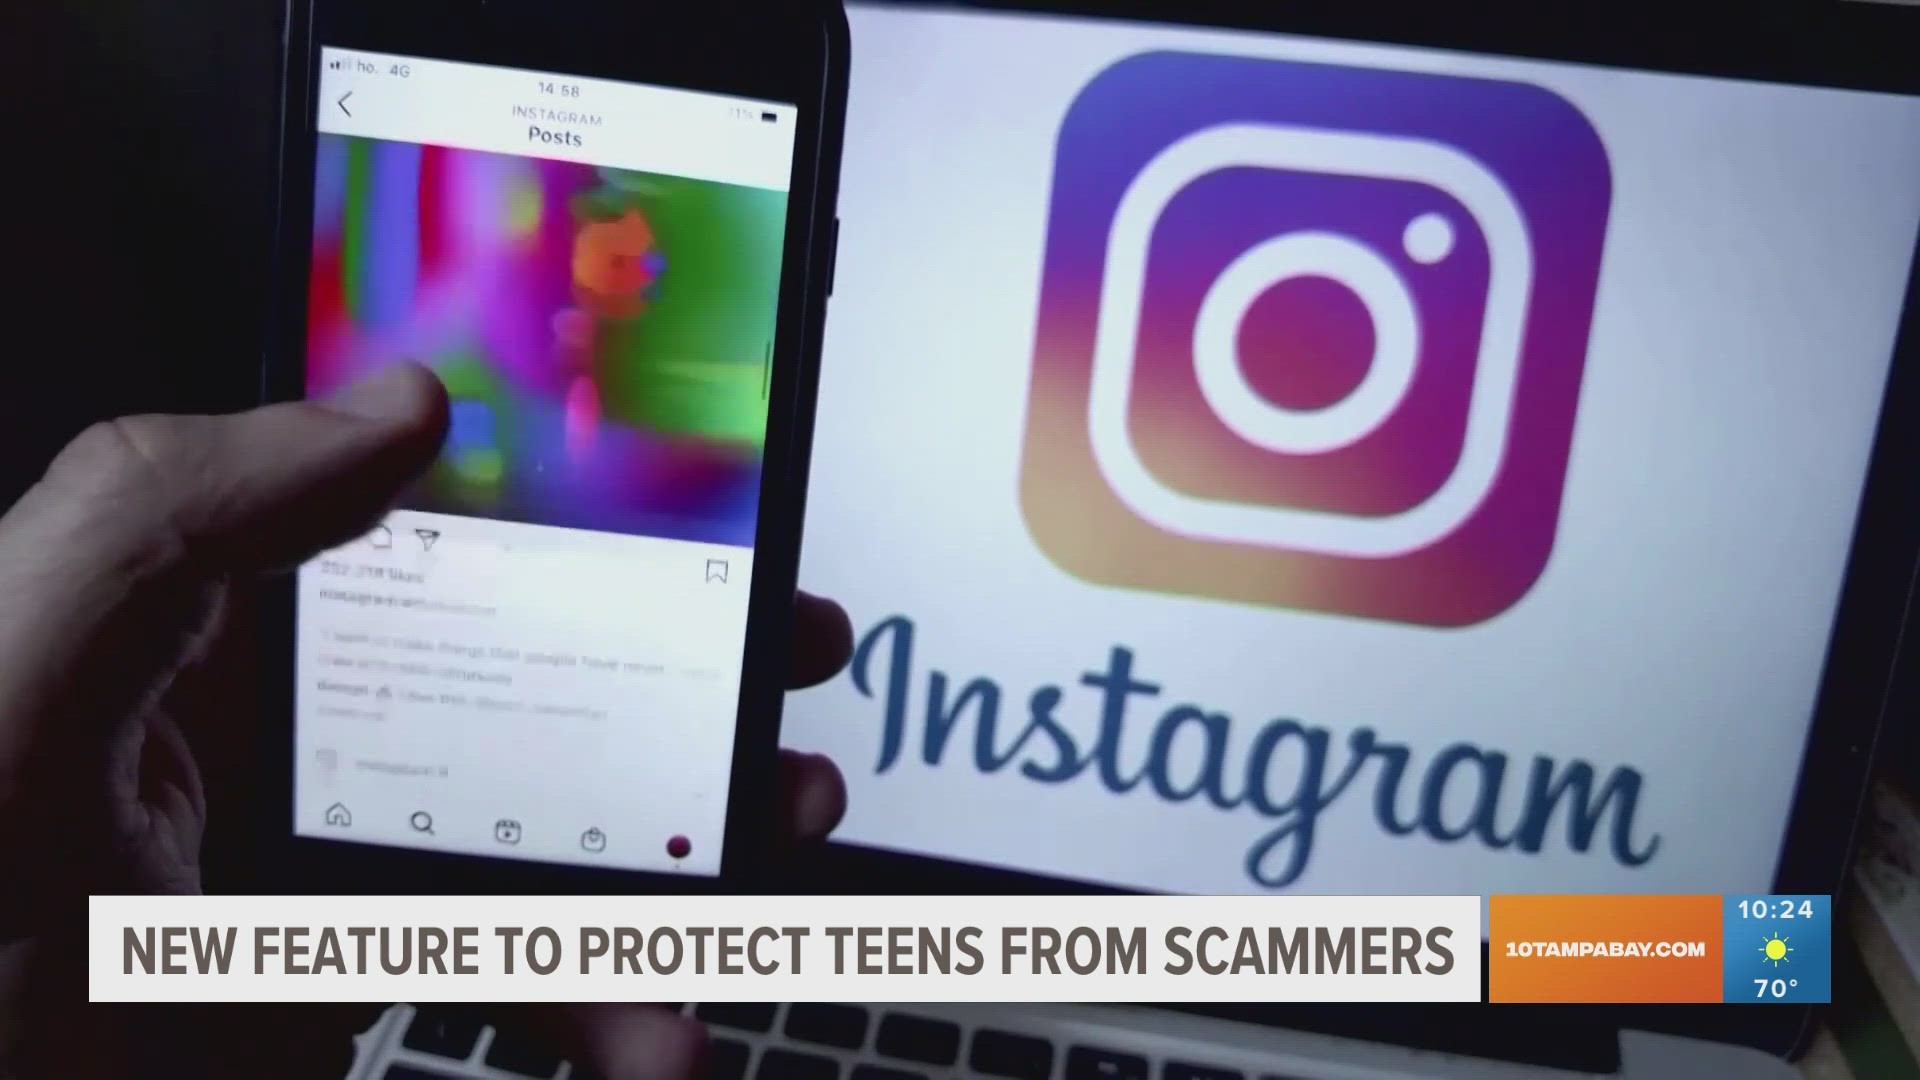 Instagram is testing out new tools such as one that will blur sensitive photos sent by users 18 and under.